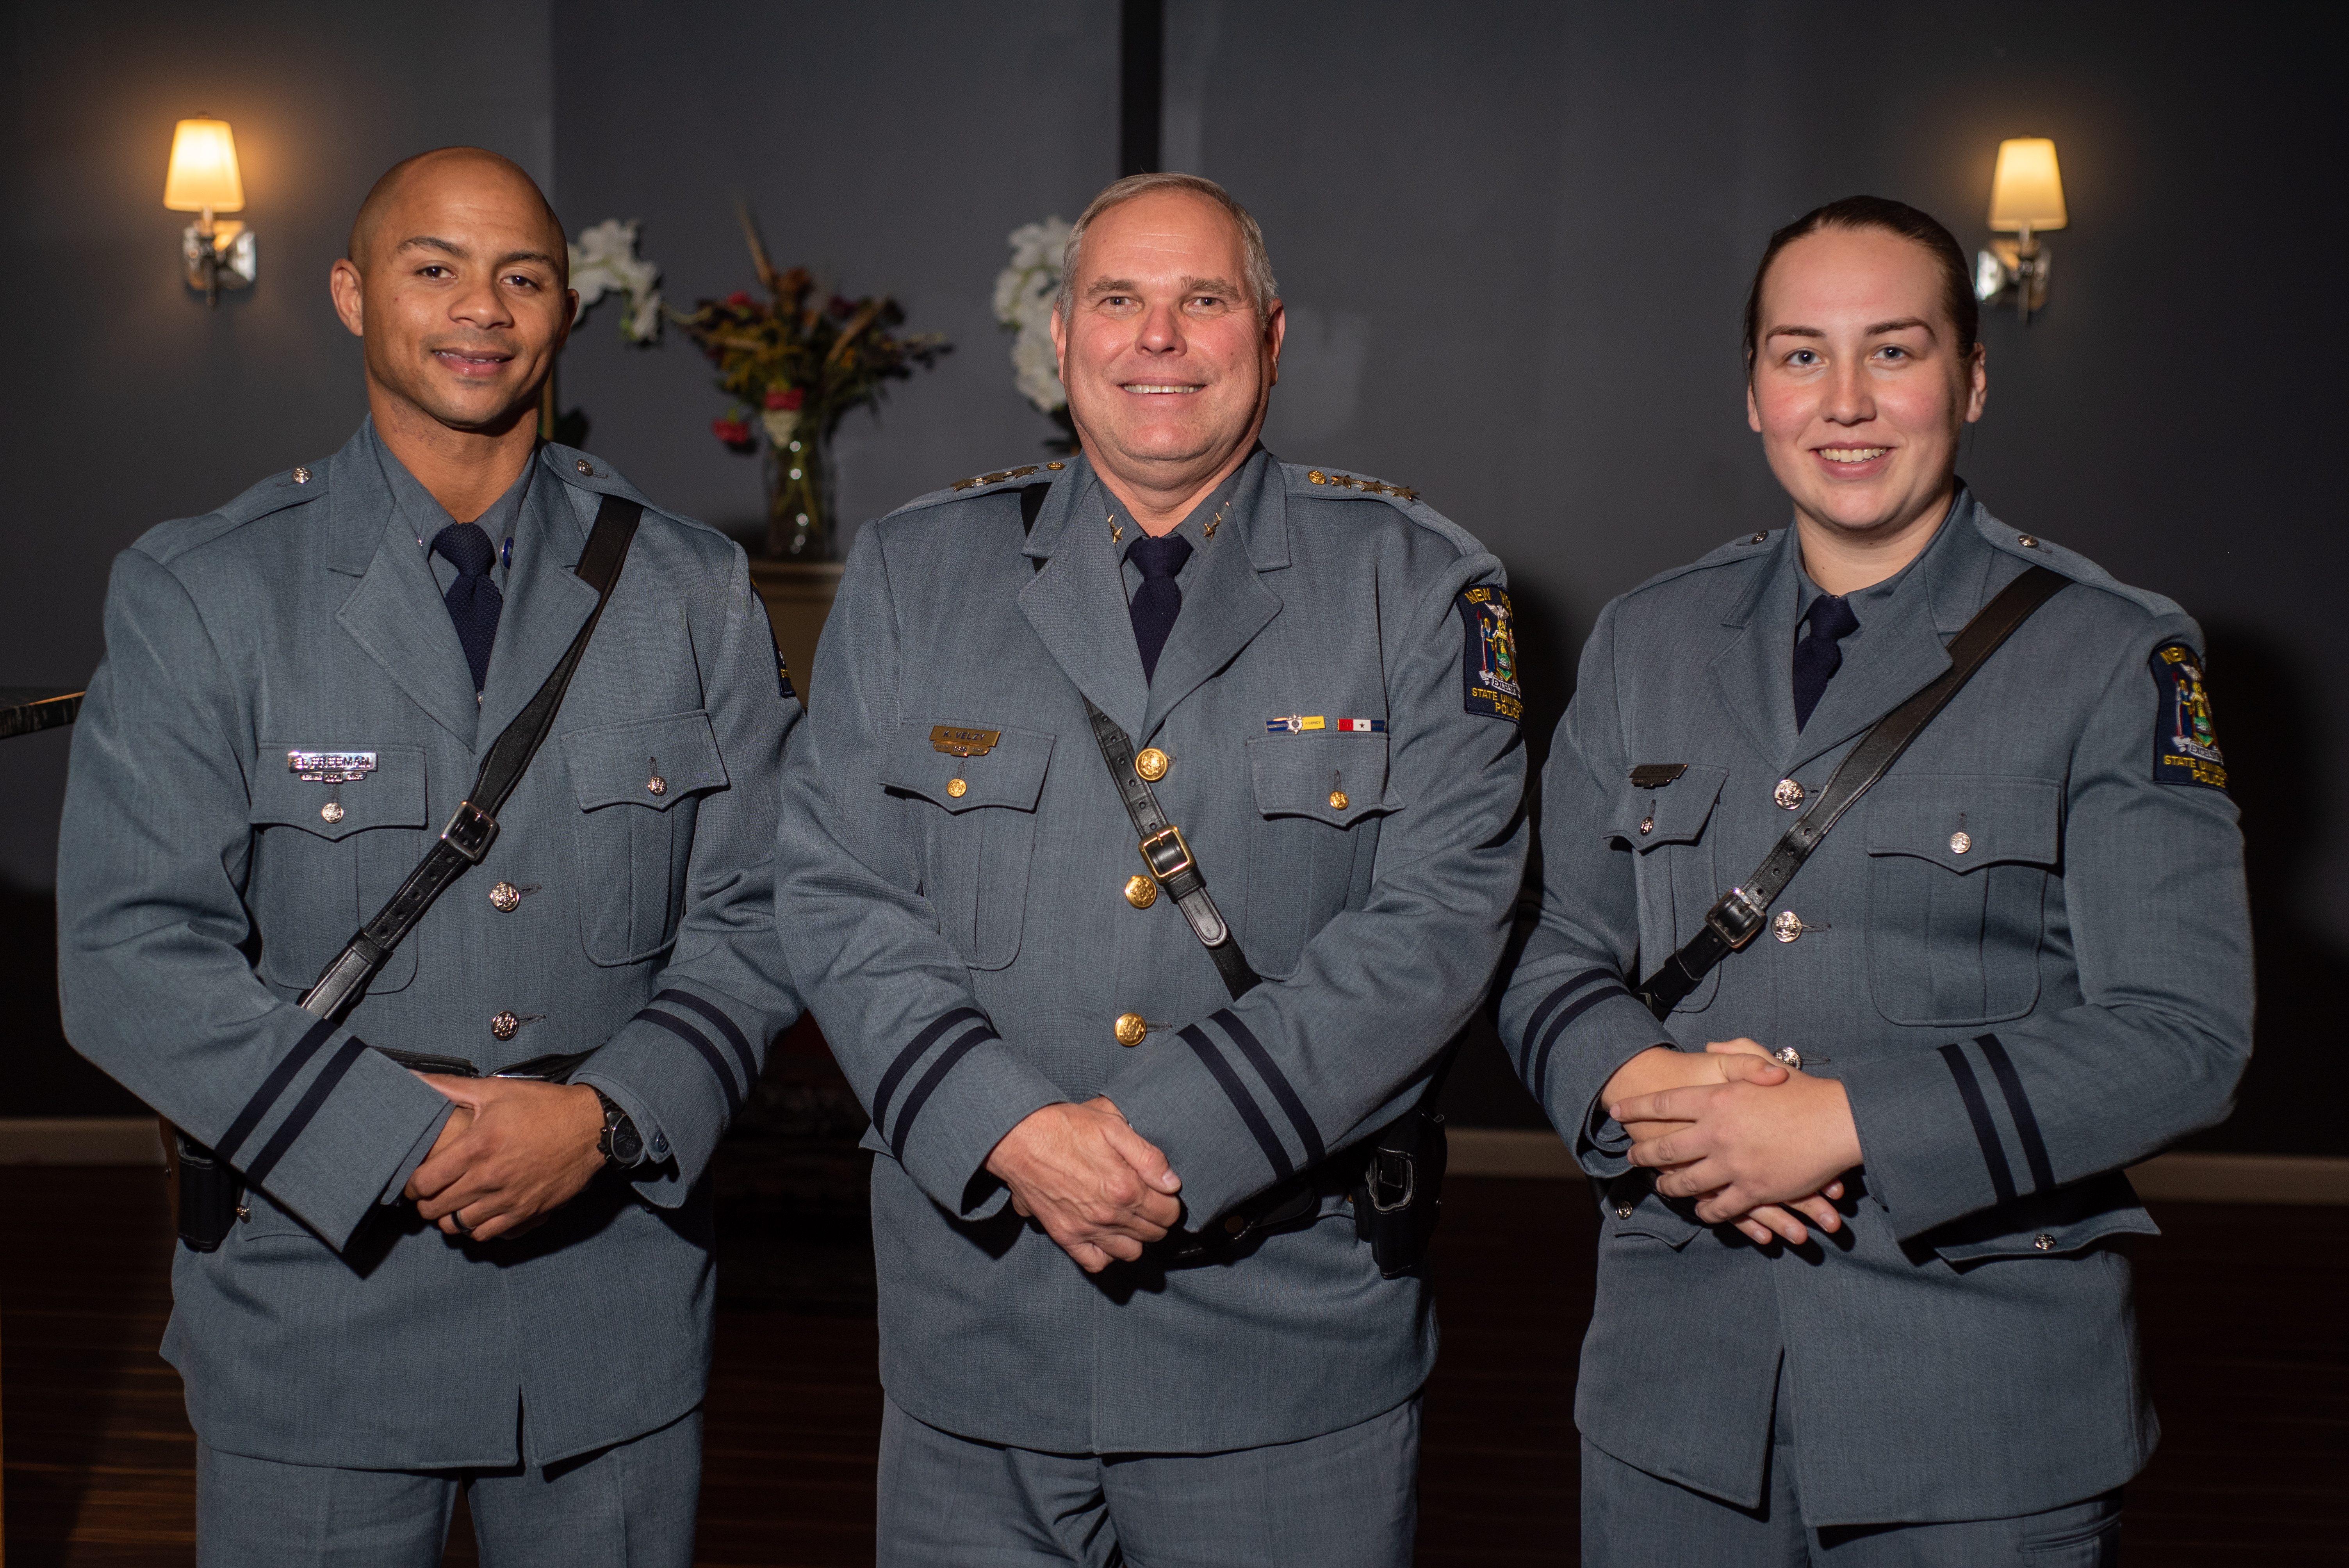 University Police Chief Kevin Velzy (center) offers his congratulations to Officer Benjamin Freeman (left) and Officer Christina Bedard, who graduated from the Alfred State Police Academy on Friday, Oct. 22.